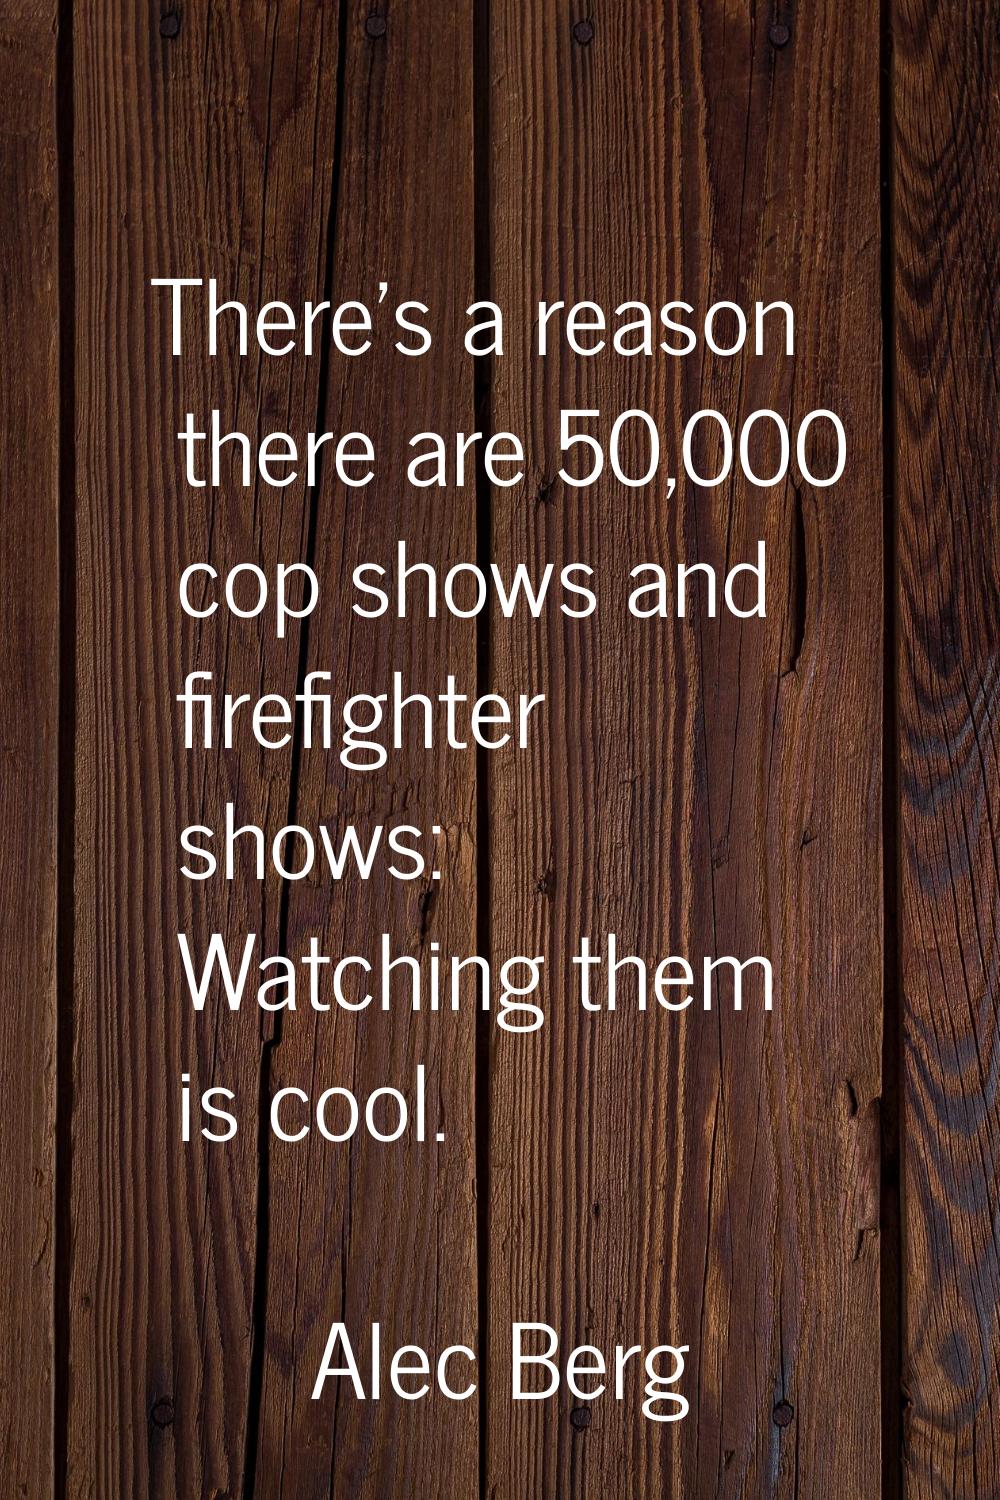 There's a reason there are 50,000 cop shows and firefighter shows: Watching them is cool.